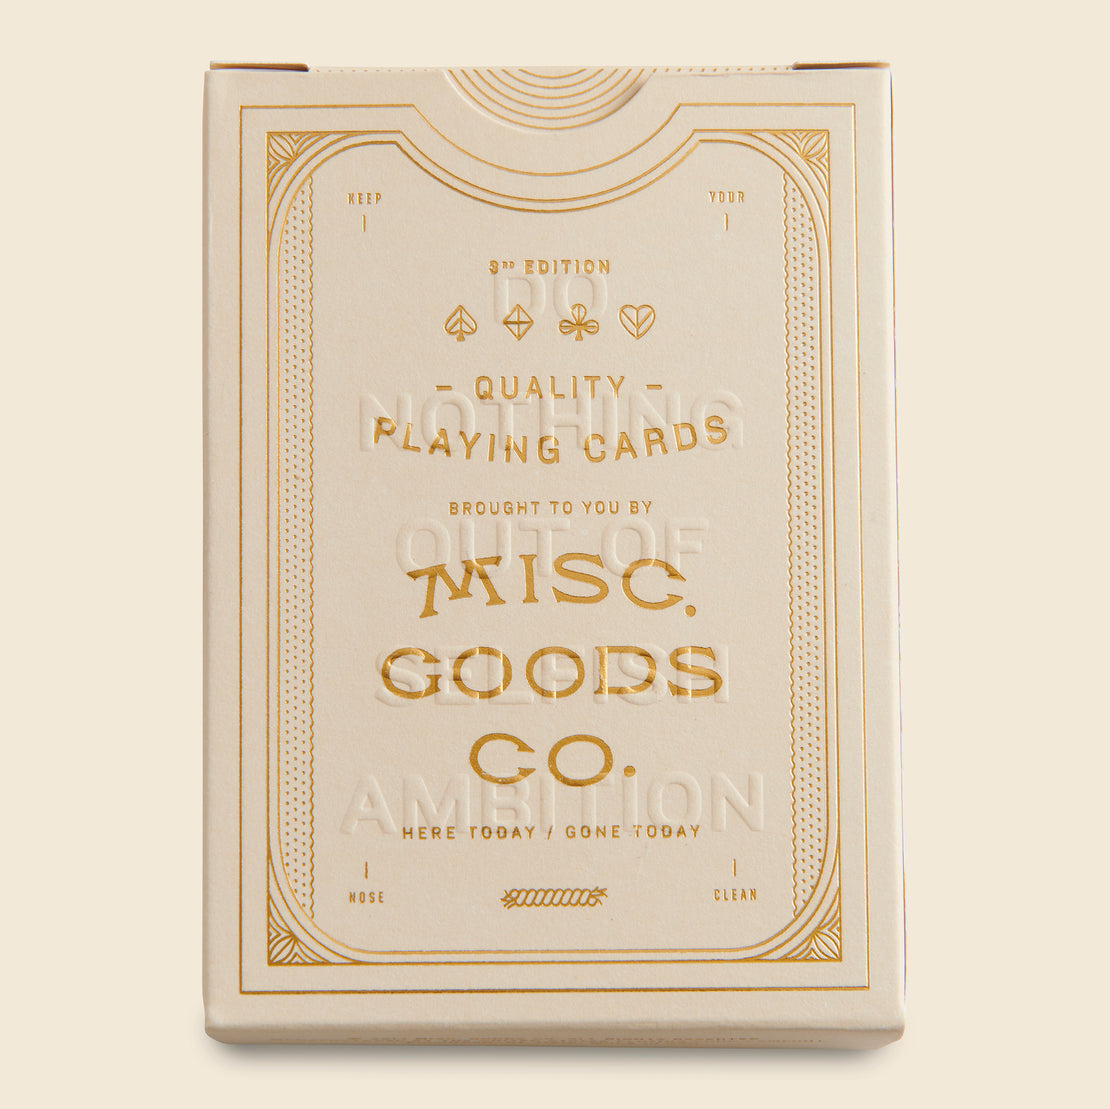 Misc Goods Co. Ivory Playing Cards